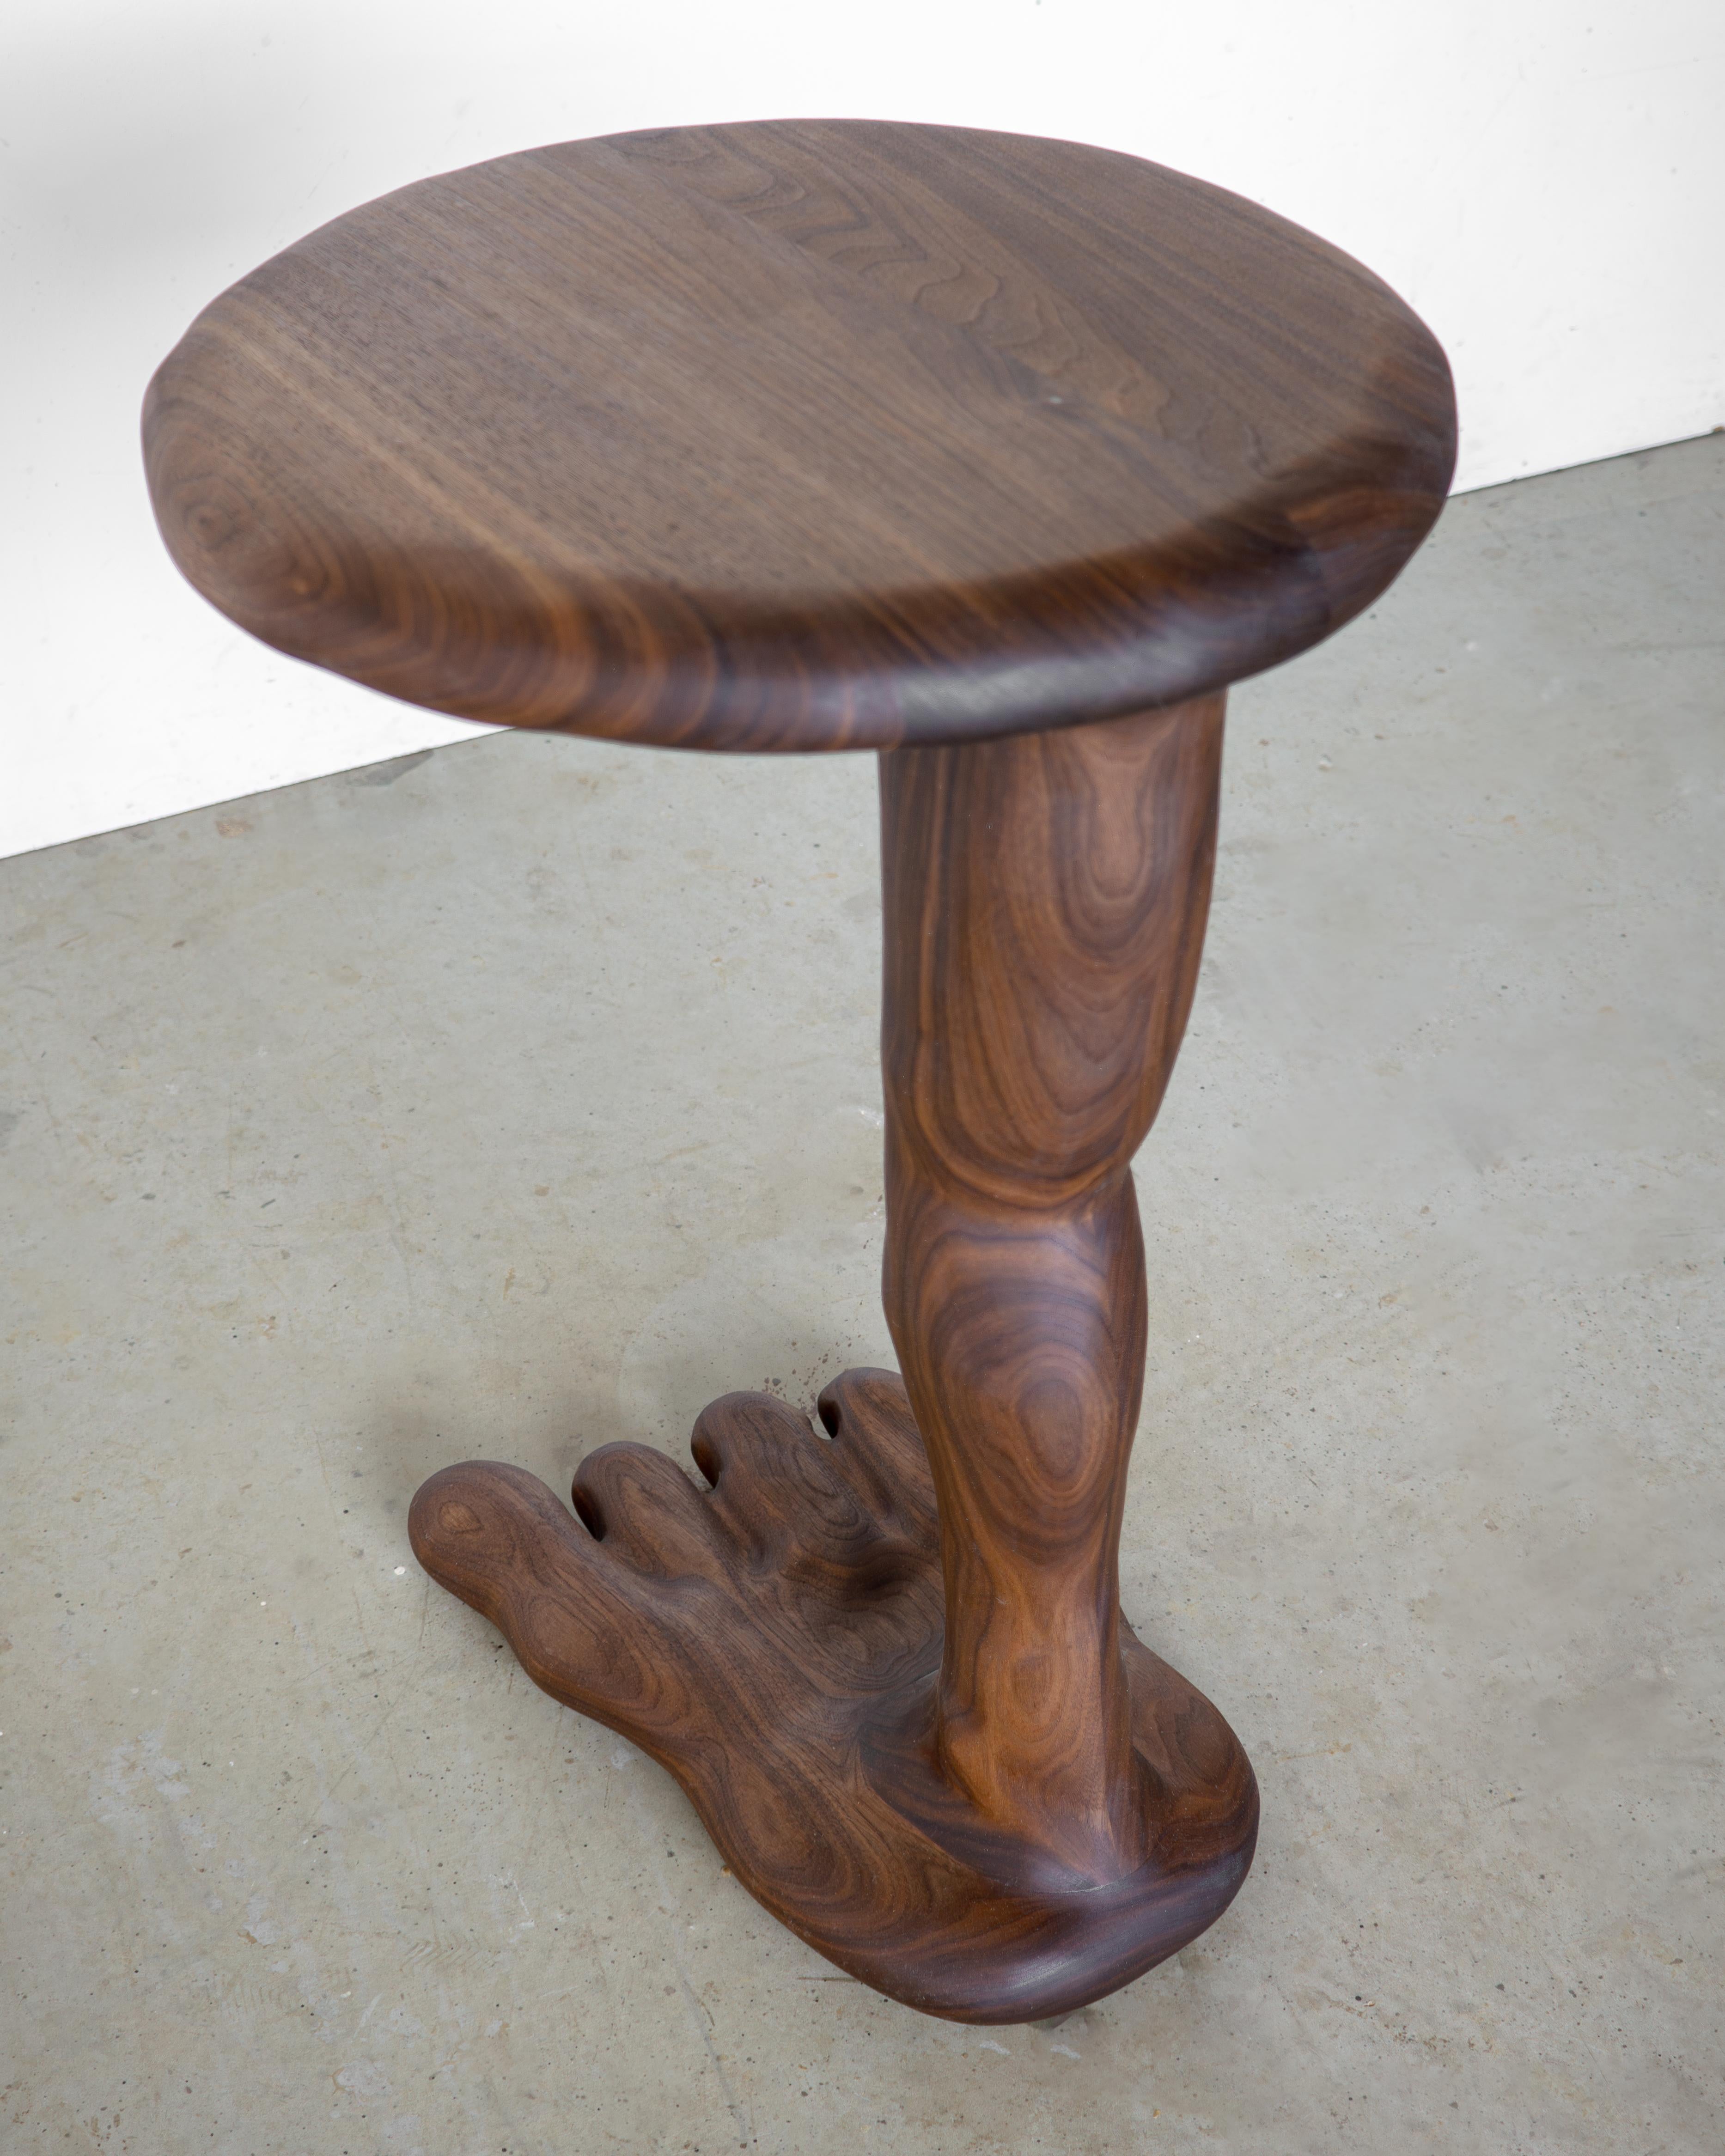 The Leg Side Table - Sculptural Table in Walnut Wood In New Condition For Sale In Waiblingen, BW